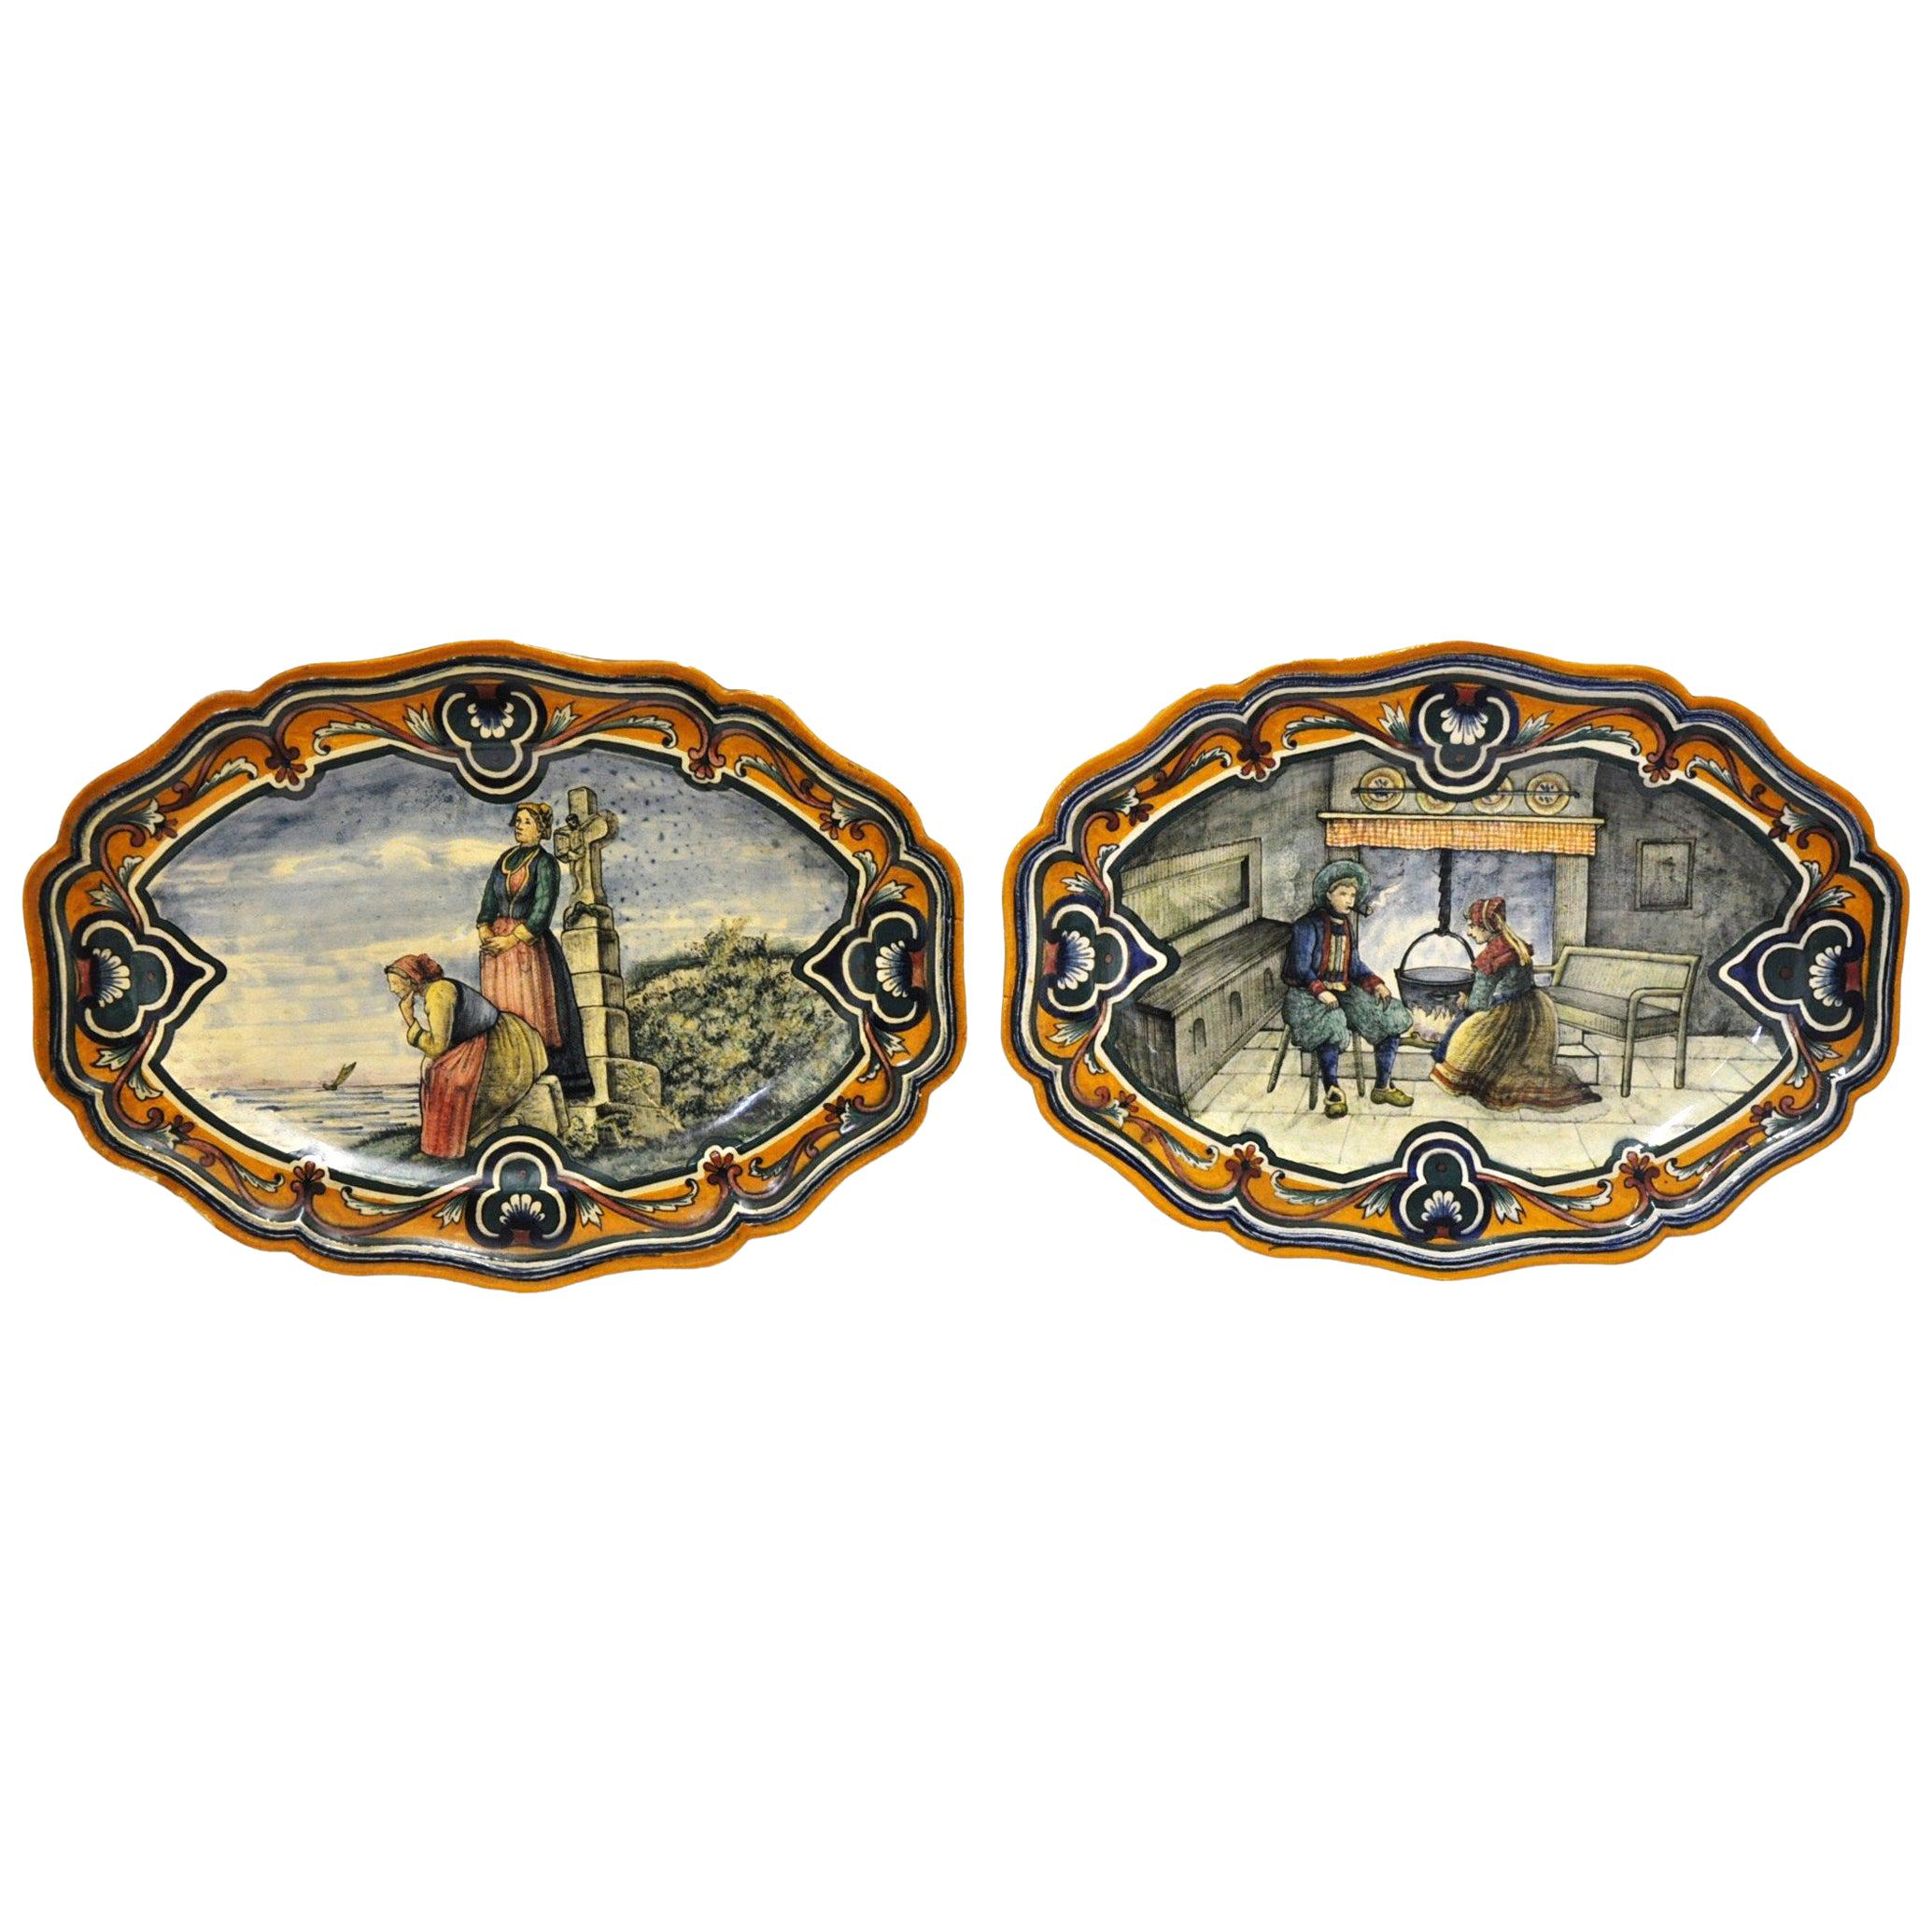 Pair of 19th Century French Hand Painted Faience Oval Wall Platters from Nevers